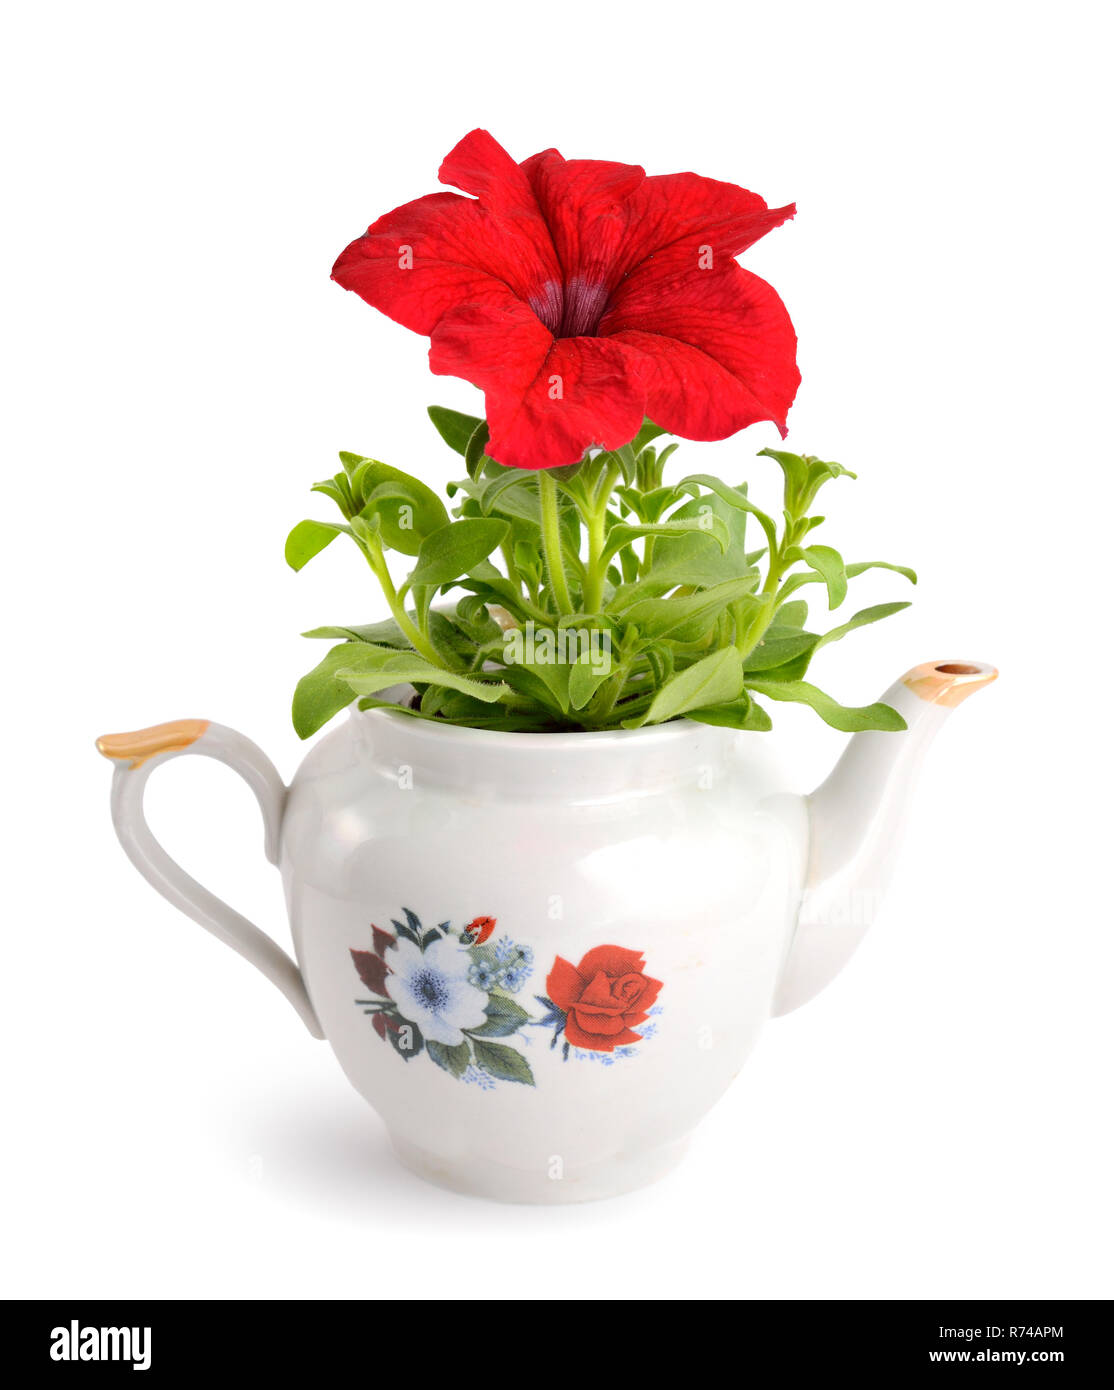 Purple Petunia in a teapot. Isolated on white background. Stock Photo